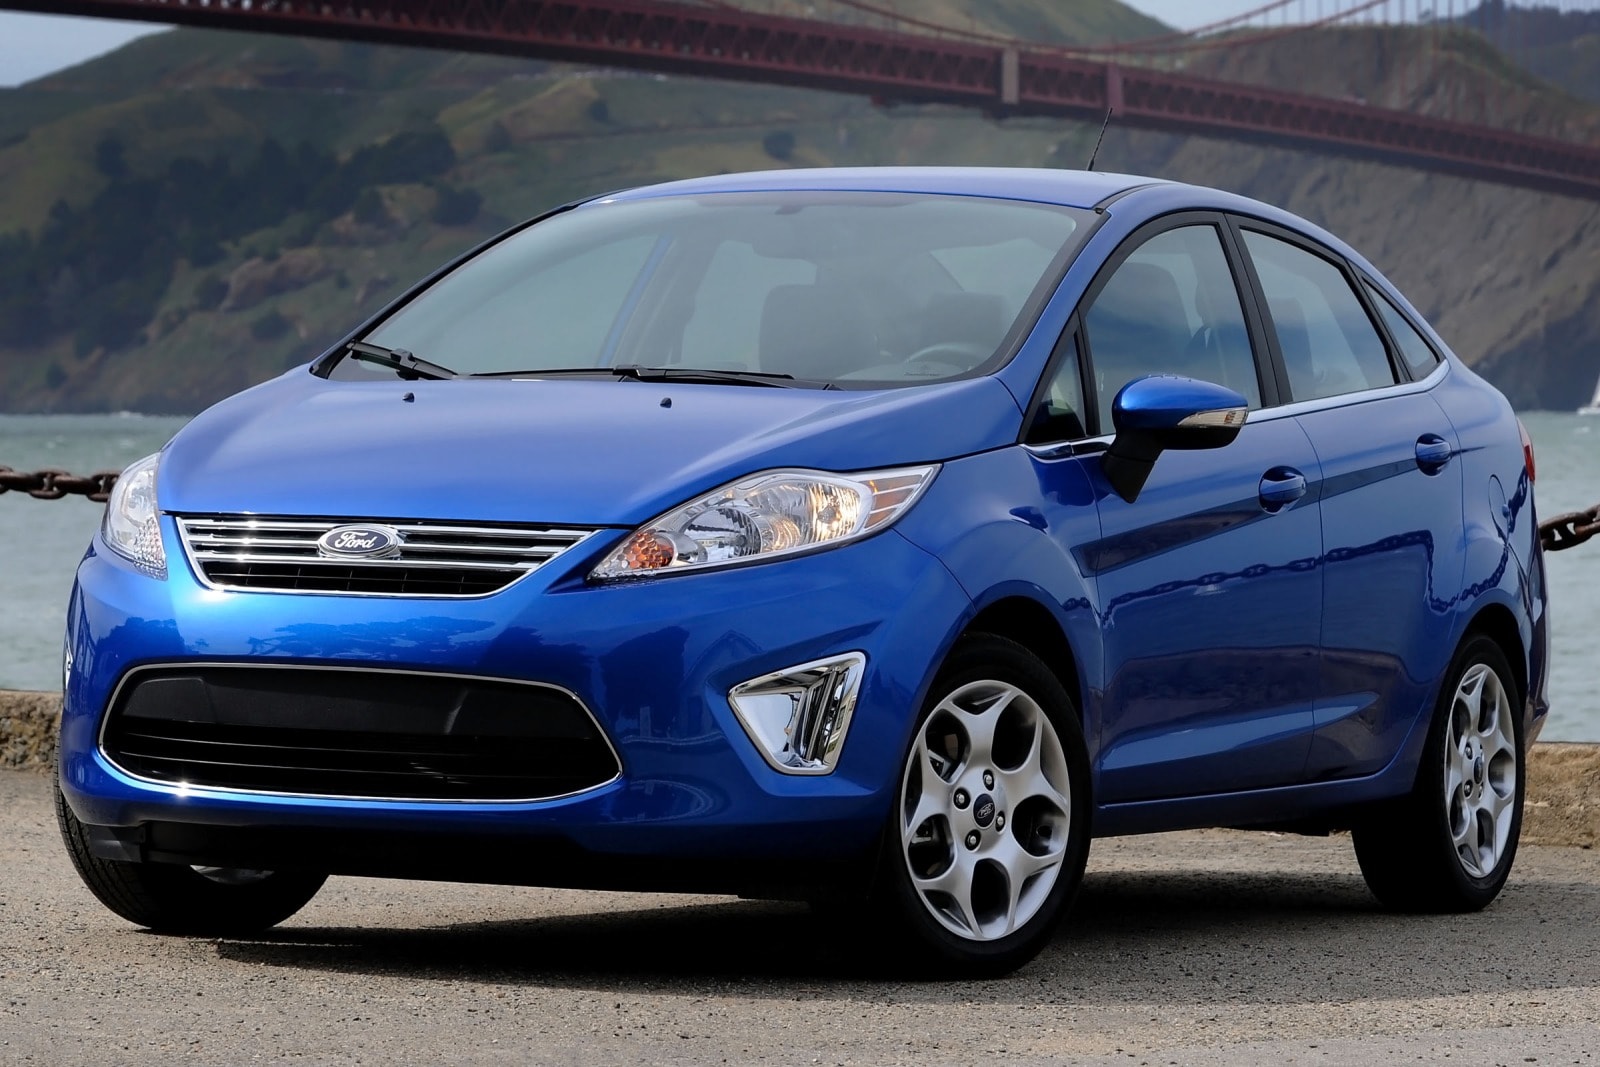 2013 Ford Fiesta Review & Ratings | Edmunds